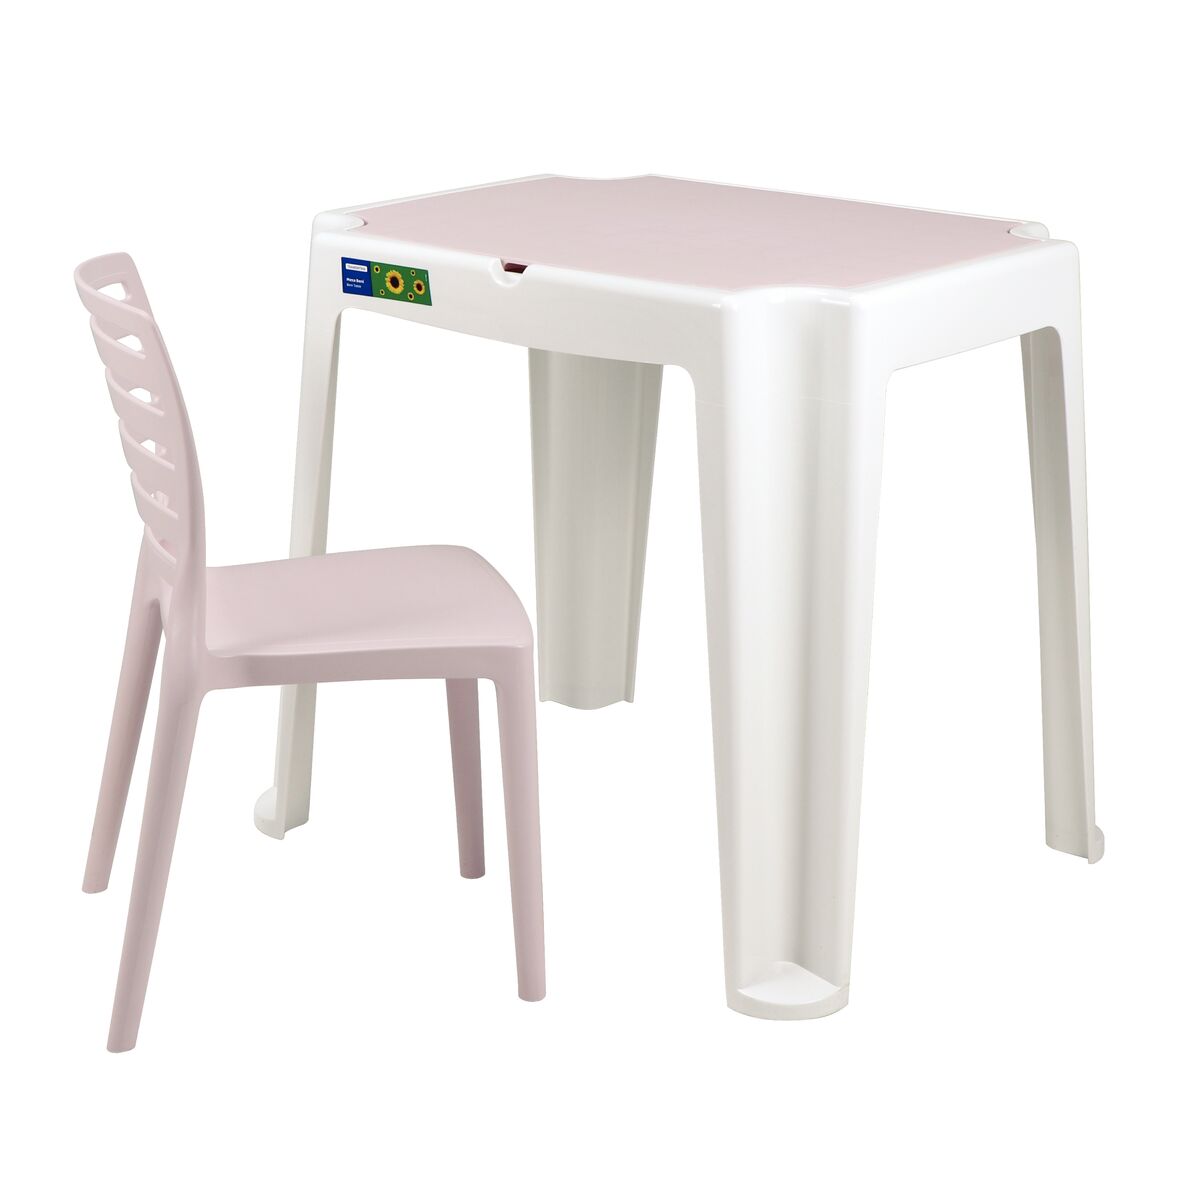 Tramontina Beni Children Table and Chair Set in Pink Polypropylene with Activity Board